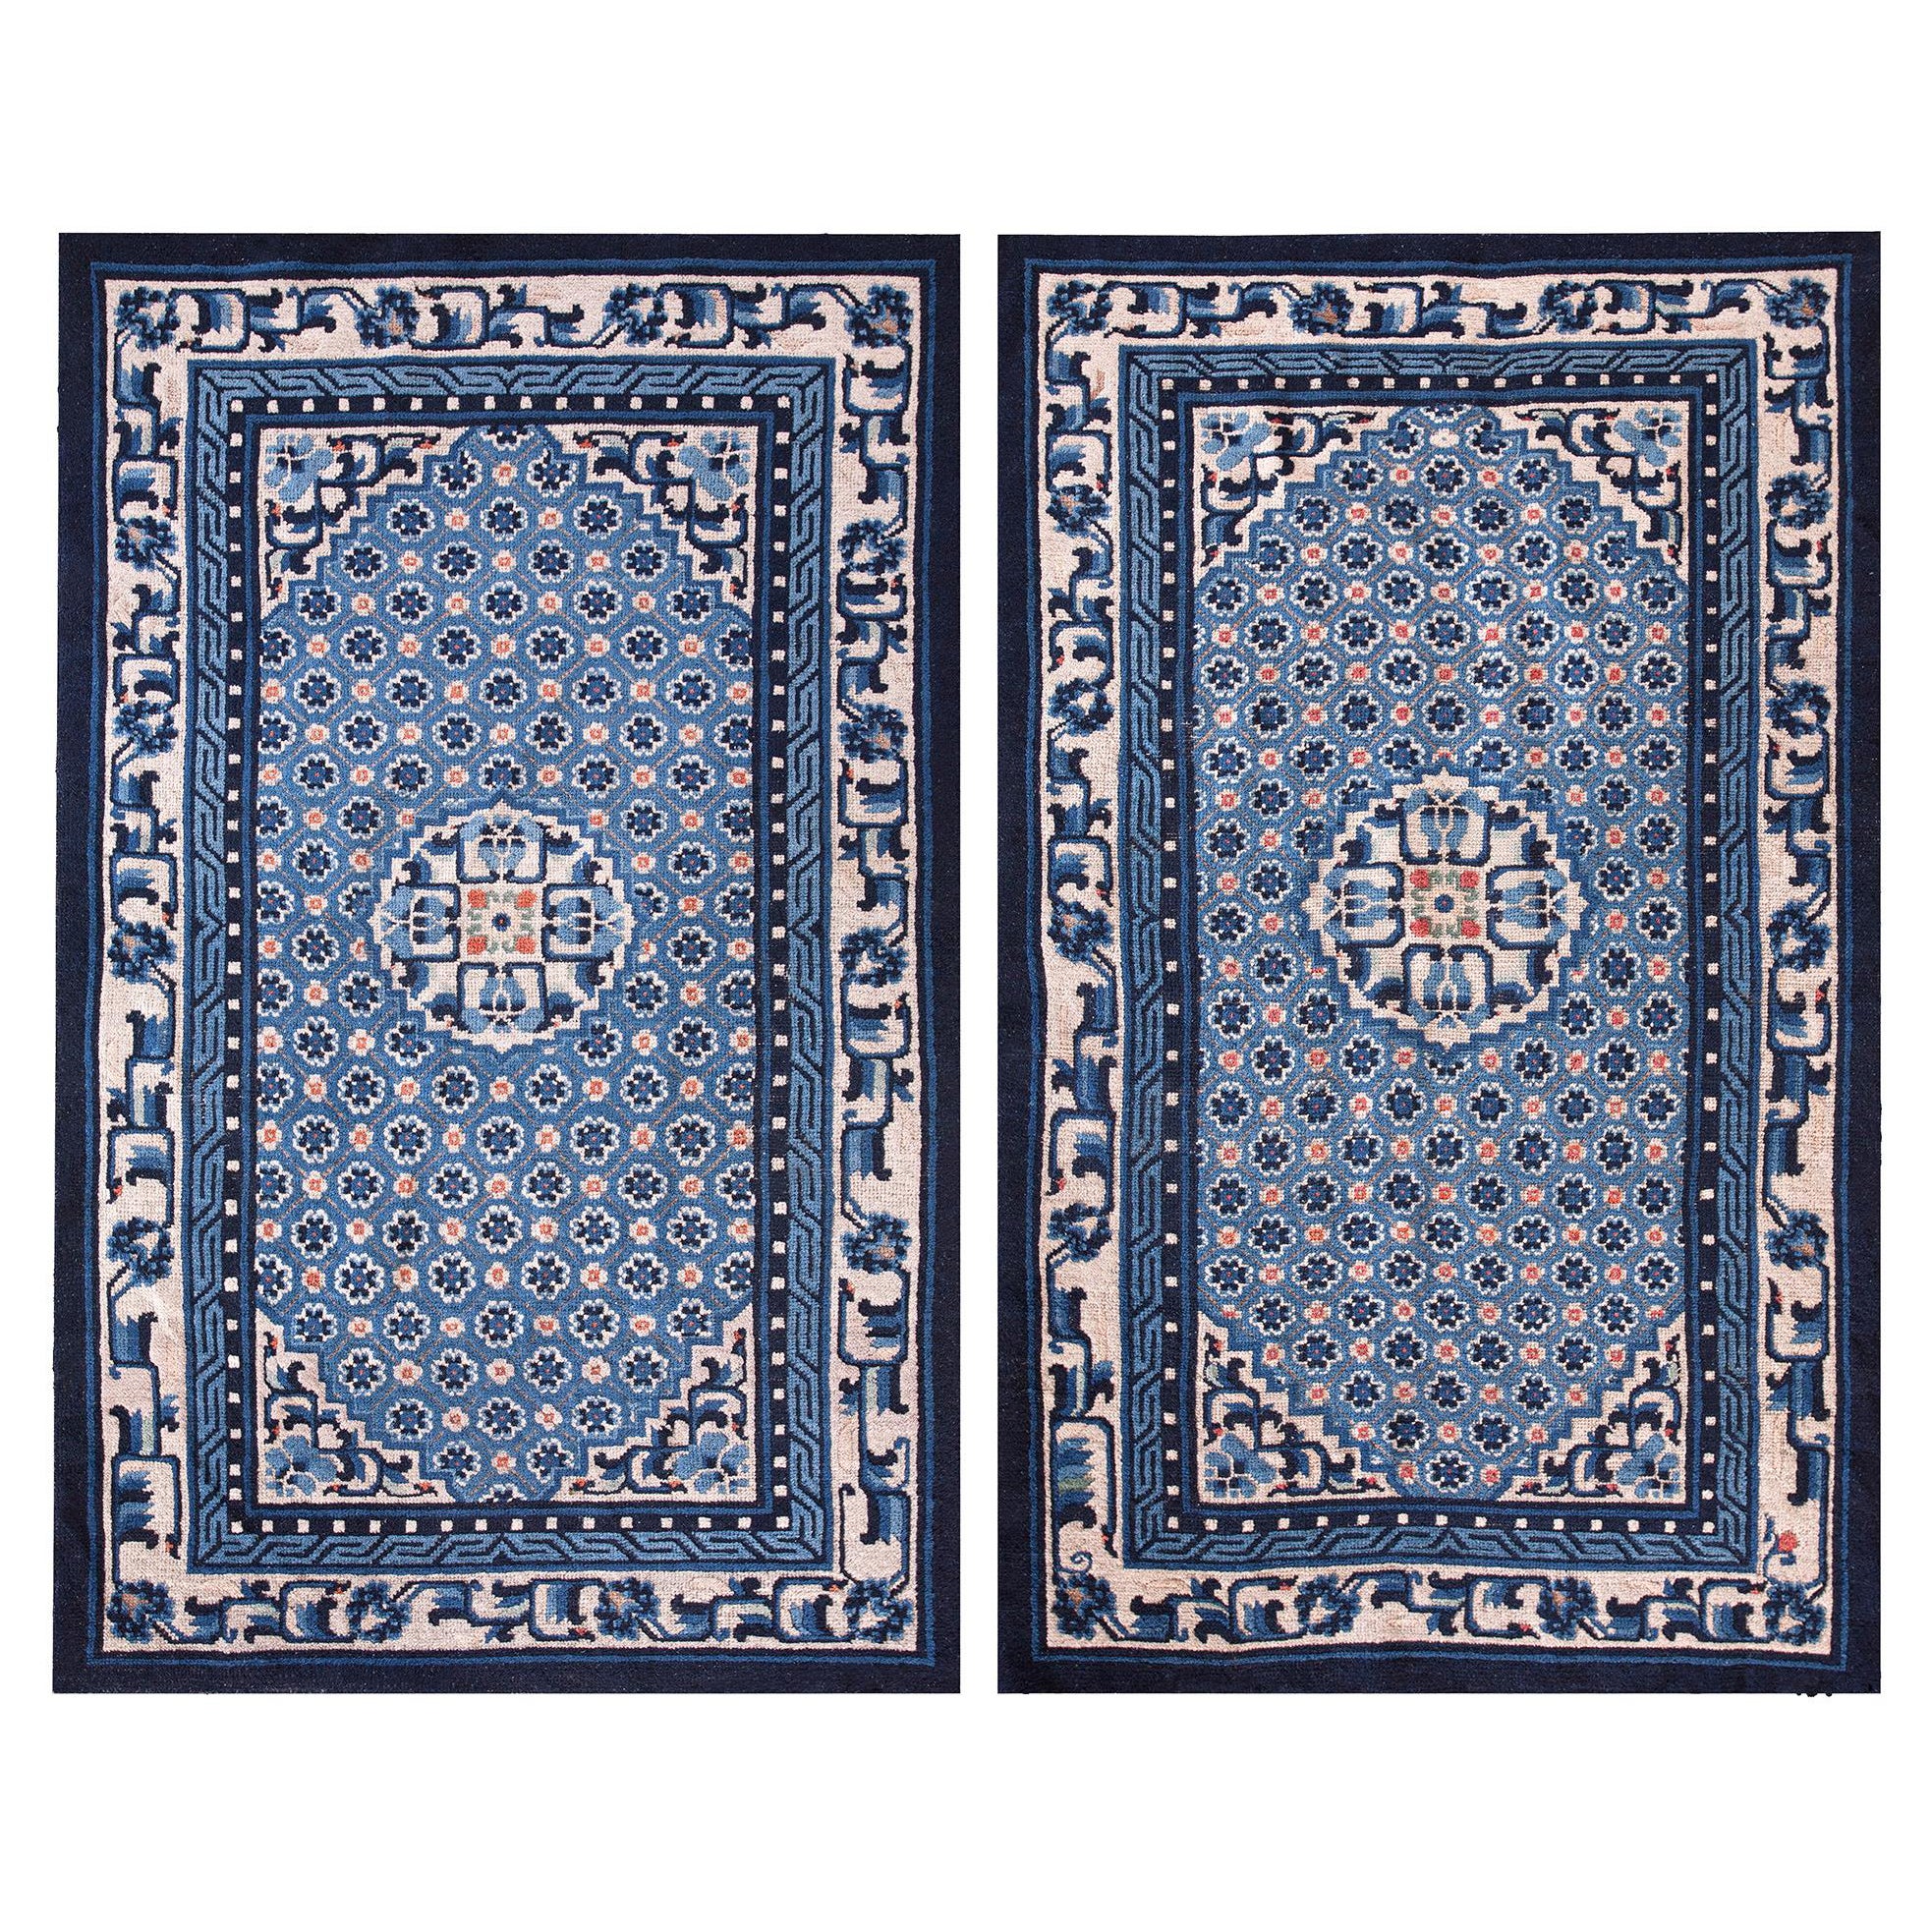 Early 20th Century Pair of  Chinese Peking carpets ( 3'2" x 5'2" - 97 x 158 ) For Sale